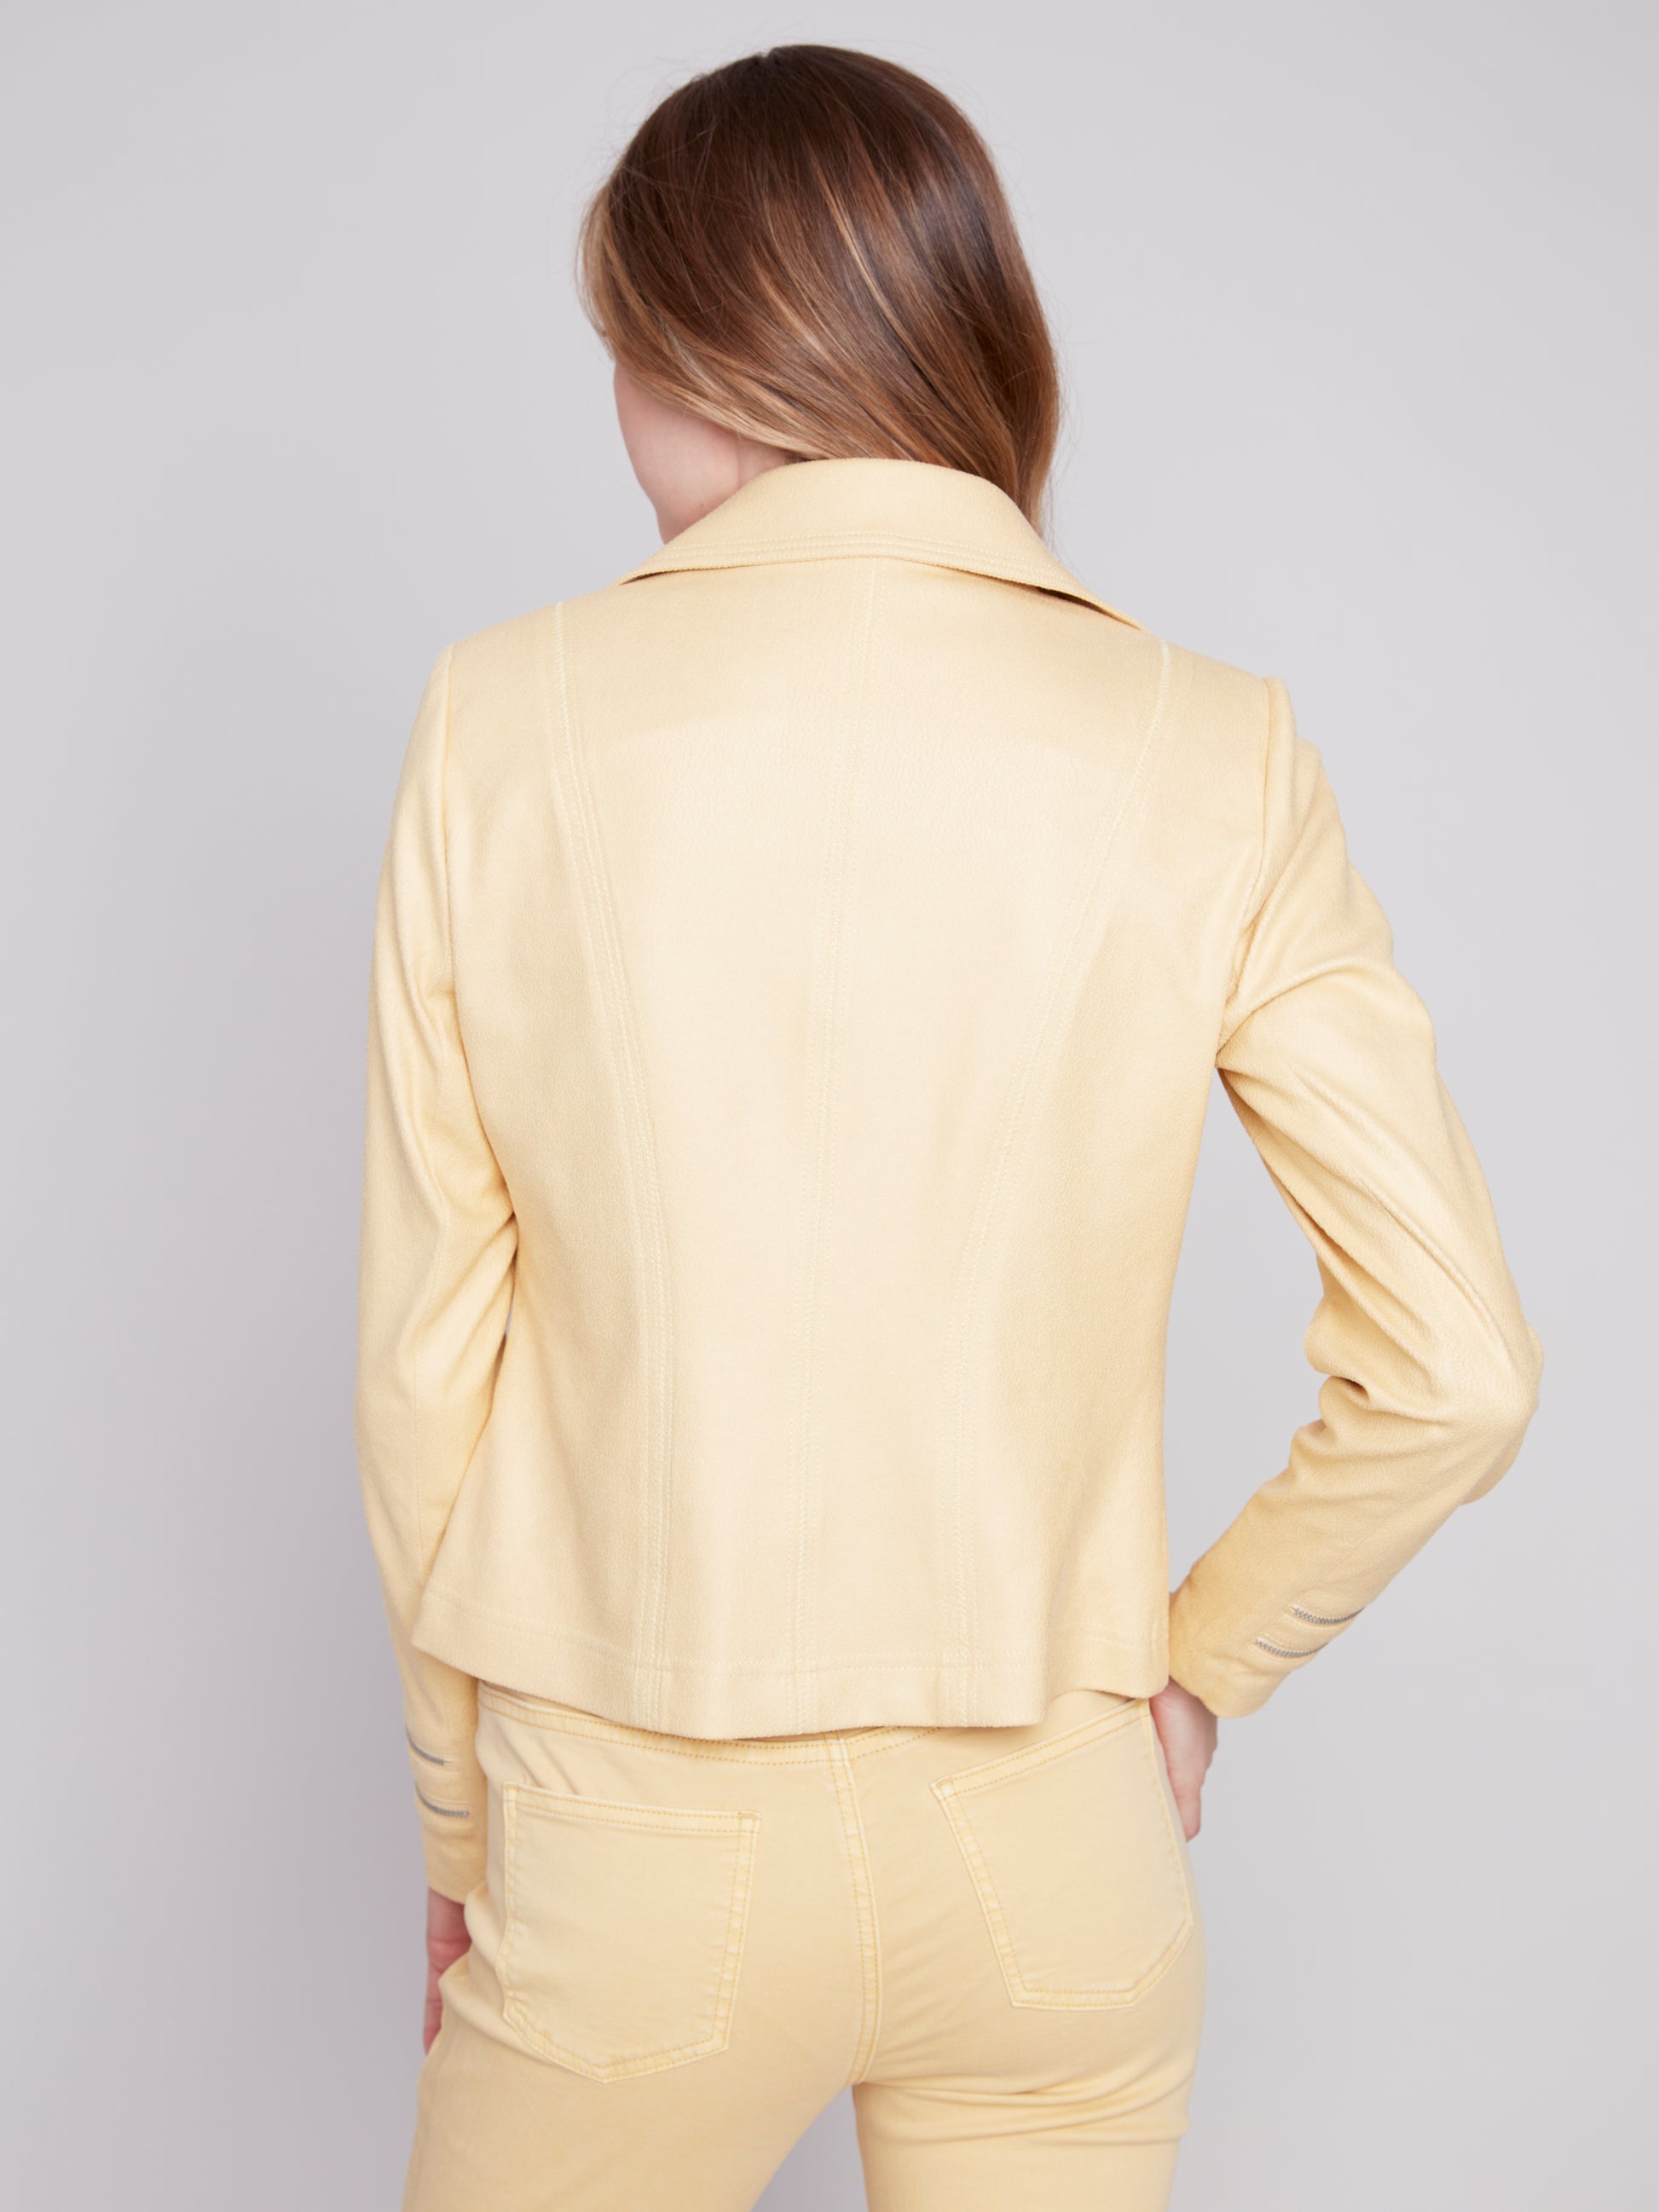 A woman wearing a yellow Charlie B Vintage Moto Faux Leather Jacket.